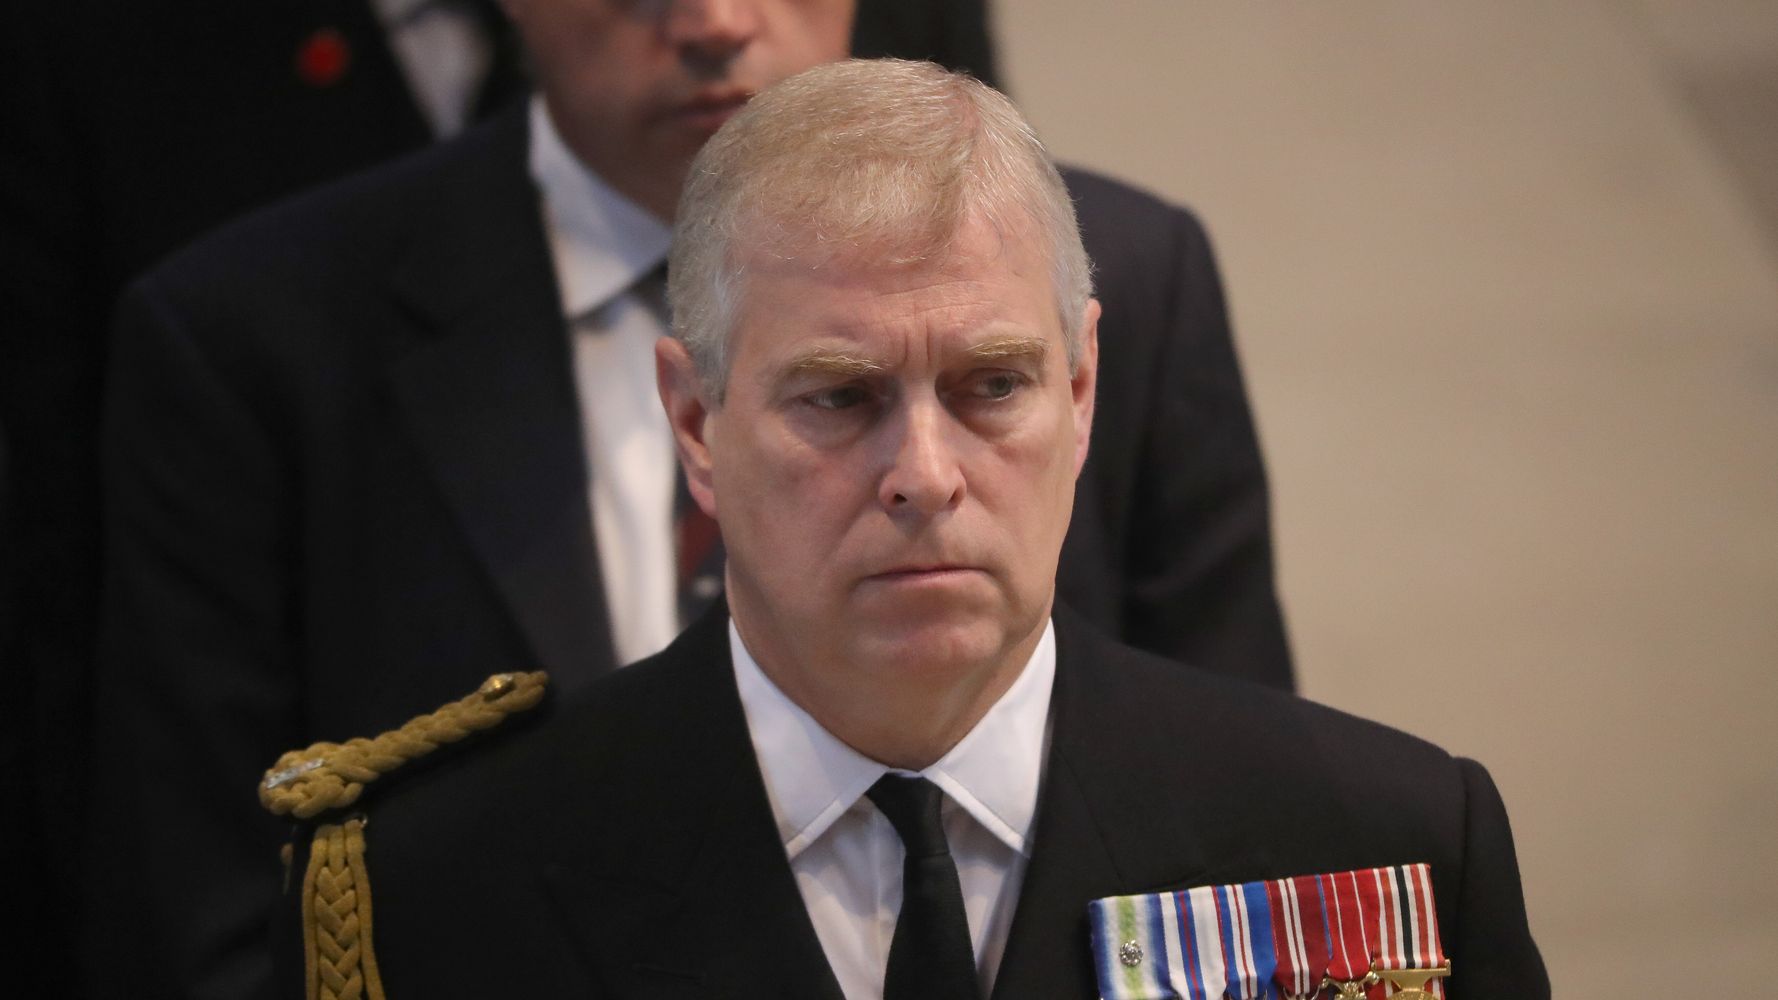 Queen Elizabeth To Allow Prince Andrew To Keep Honorary Military Title: Report